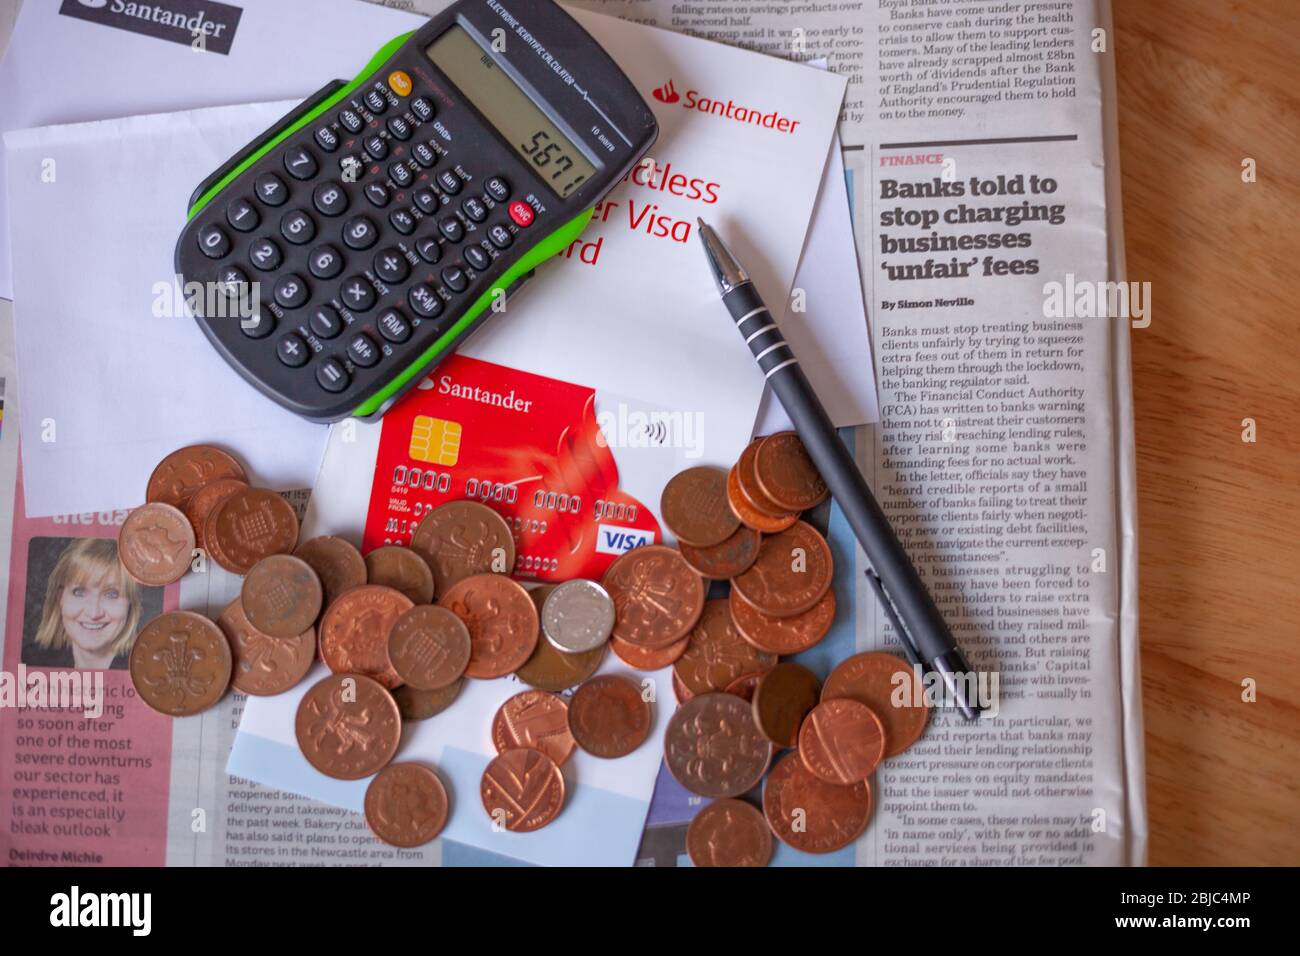 Business & Finance News Concept - Banking Fees for Business under scrutiny.  Calculator, newspaper on office table. Copyspace. UK 2020 Stock Photo -  Alamy